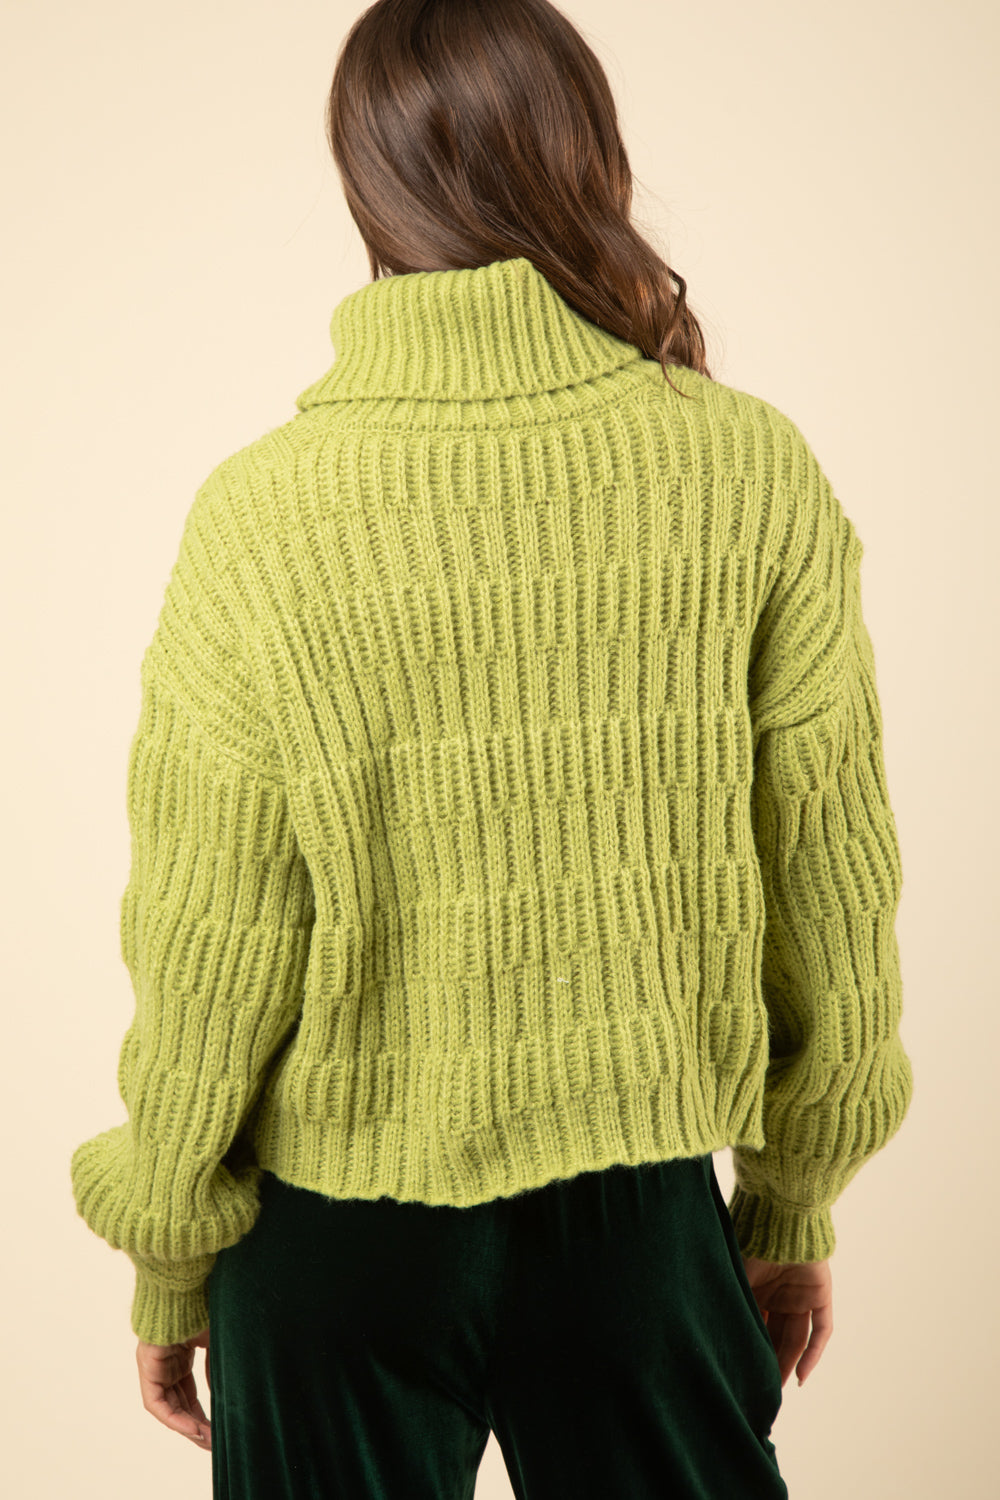 Avocado Turtle Neck Textured Knit Sweater Top Final Sale